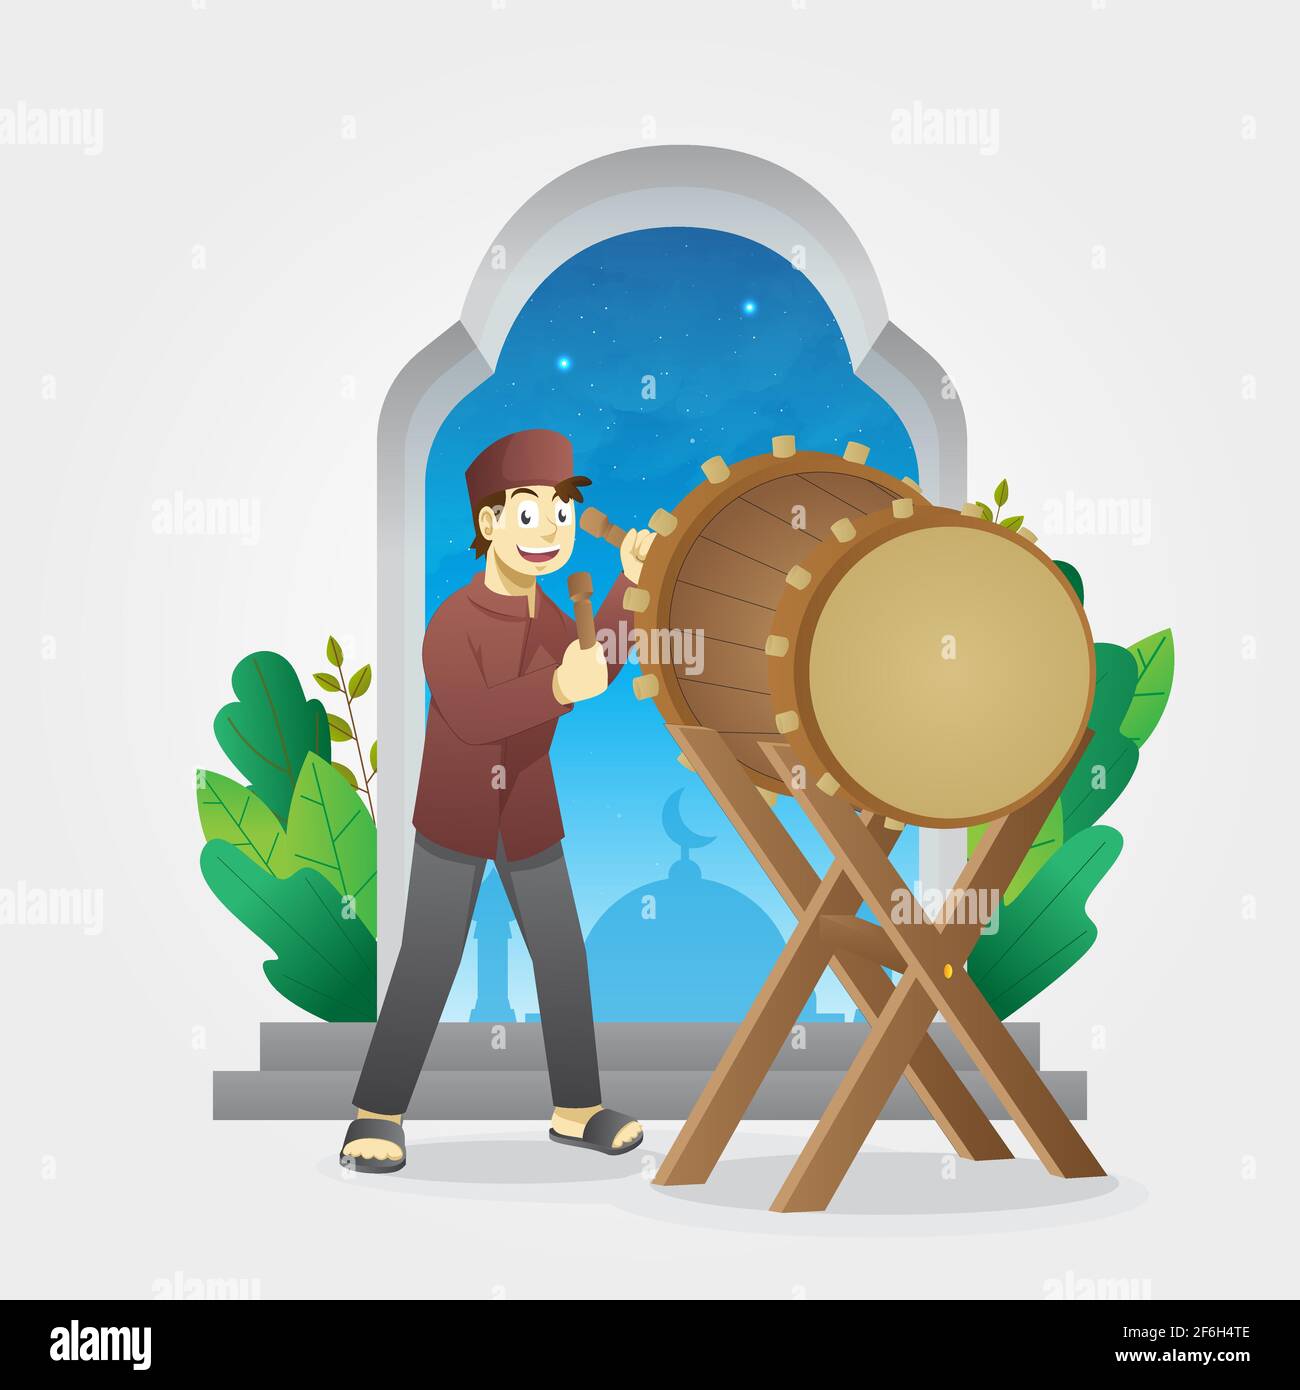 Eid al fitr greetings with a boy hitting a ceremonial drum Stock Vector